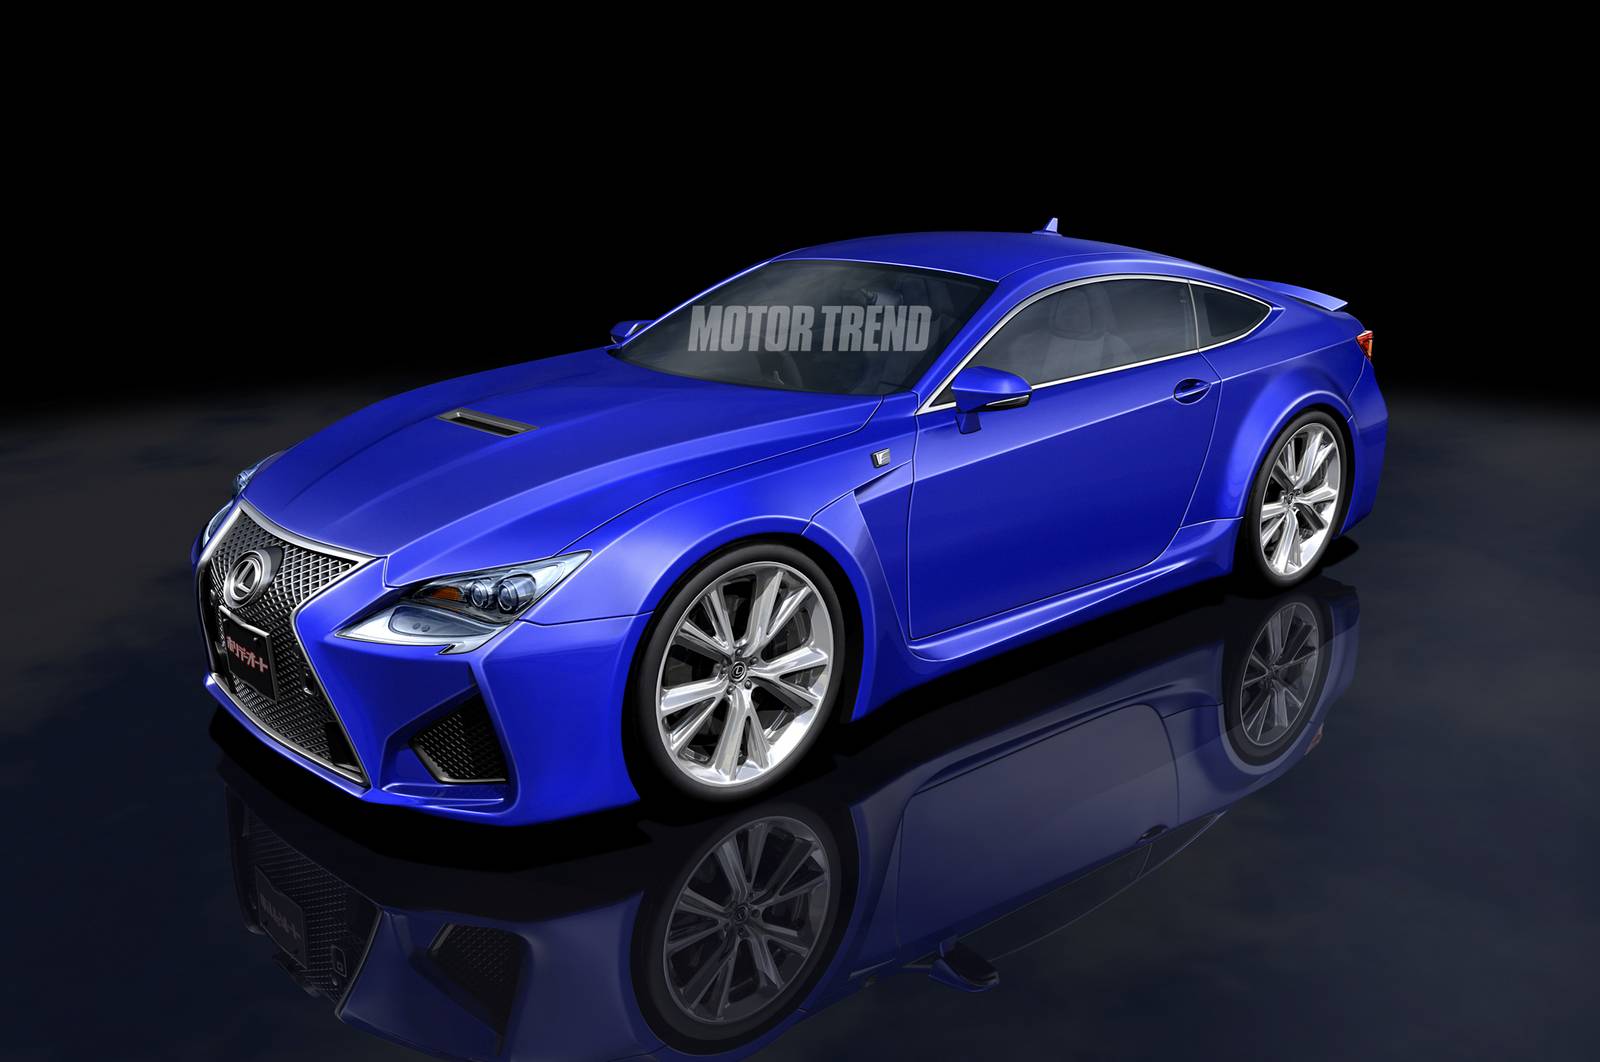 2015 Lexus Rc F To Cost Over 100k Feature Active Aero And Hit